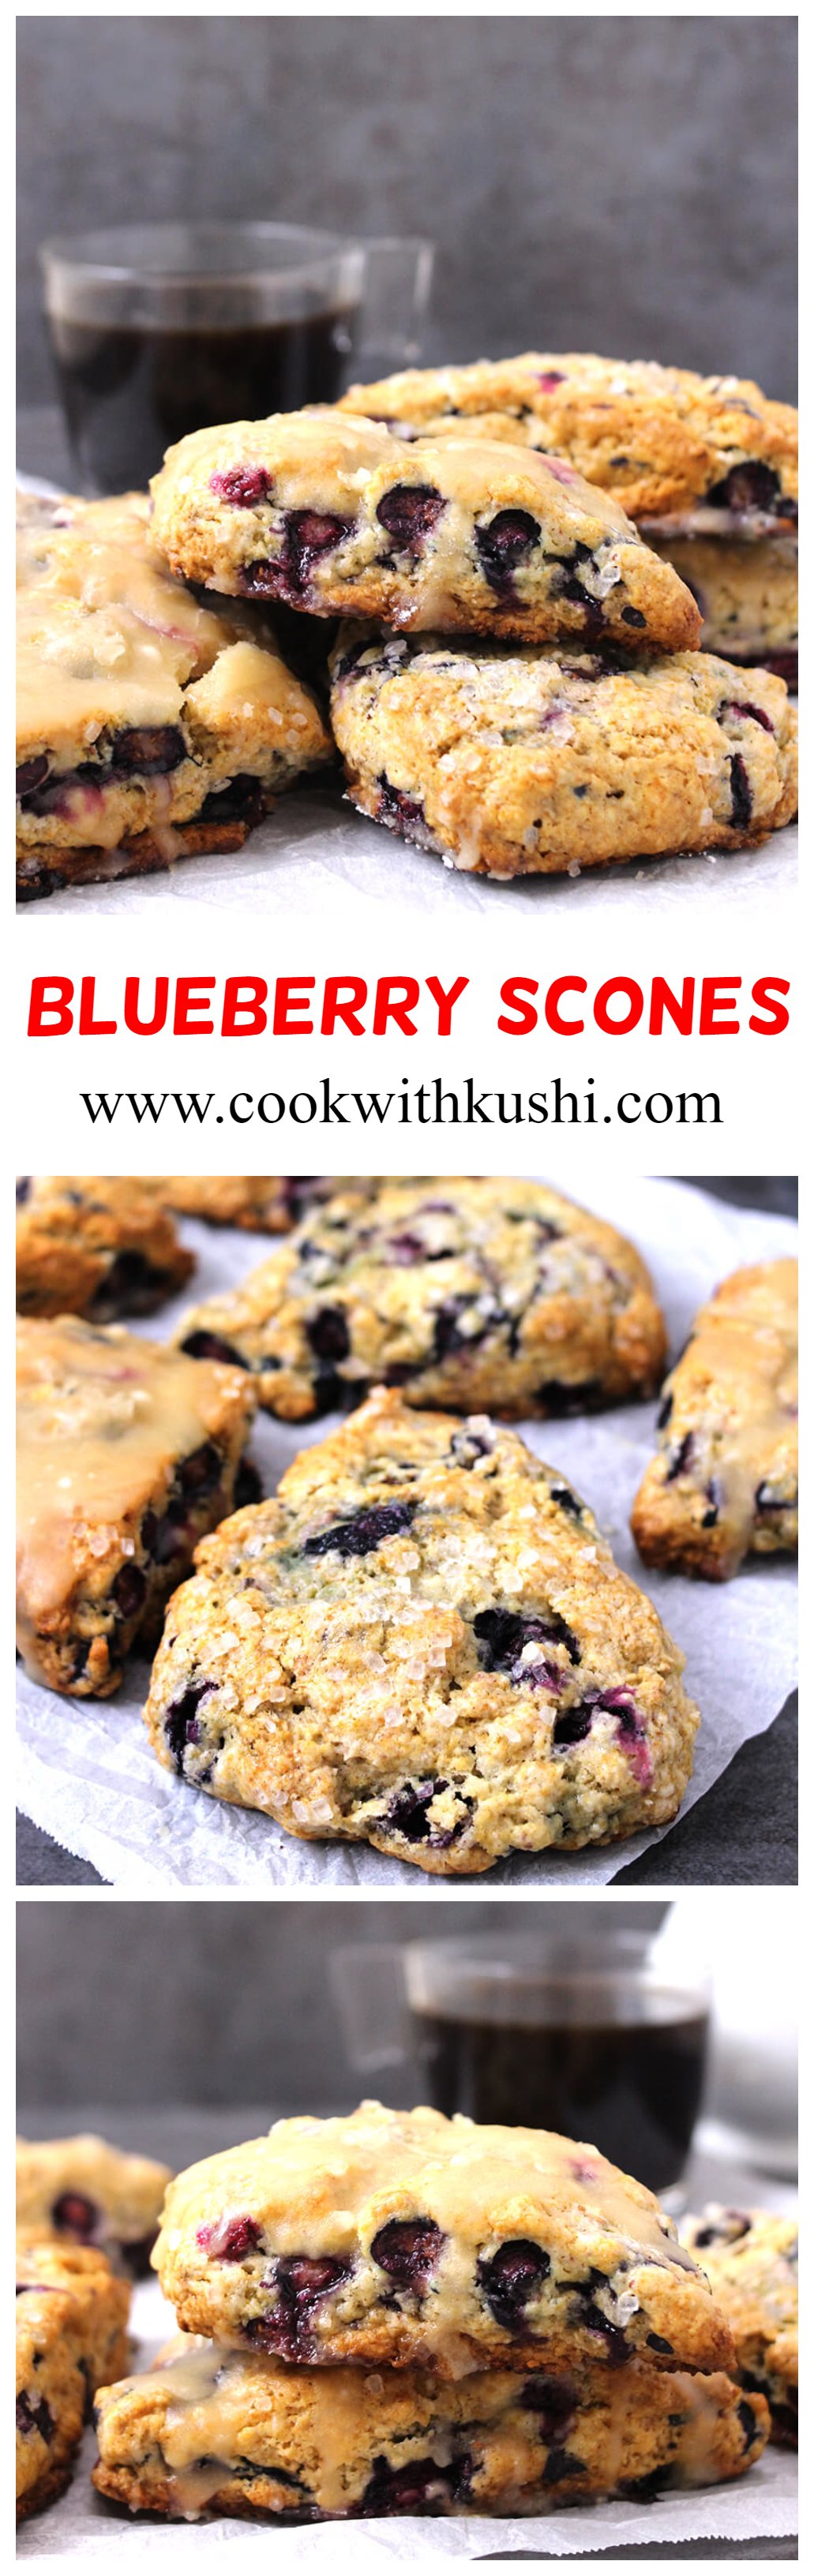 Blueberry Scones are moist and buttery with sweet and crumbly edges, packed with juicy blueberries and maple glaze in every single bite. This would be great for breakfast or brunch! #scones #breakfastideas #lunchboxideas #brunch #blueberries #desserts #mapleglaze #vanillaicing #kidsfriendlyrecipes #bakedgoods #americanscones